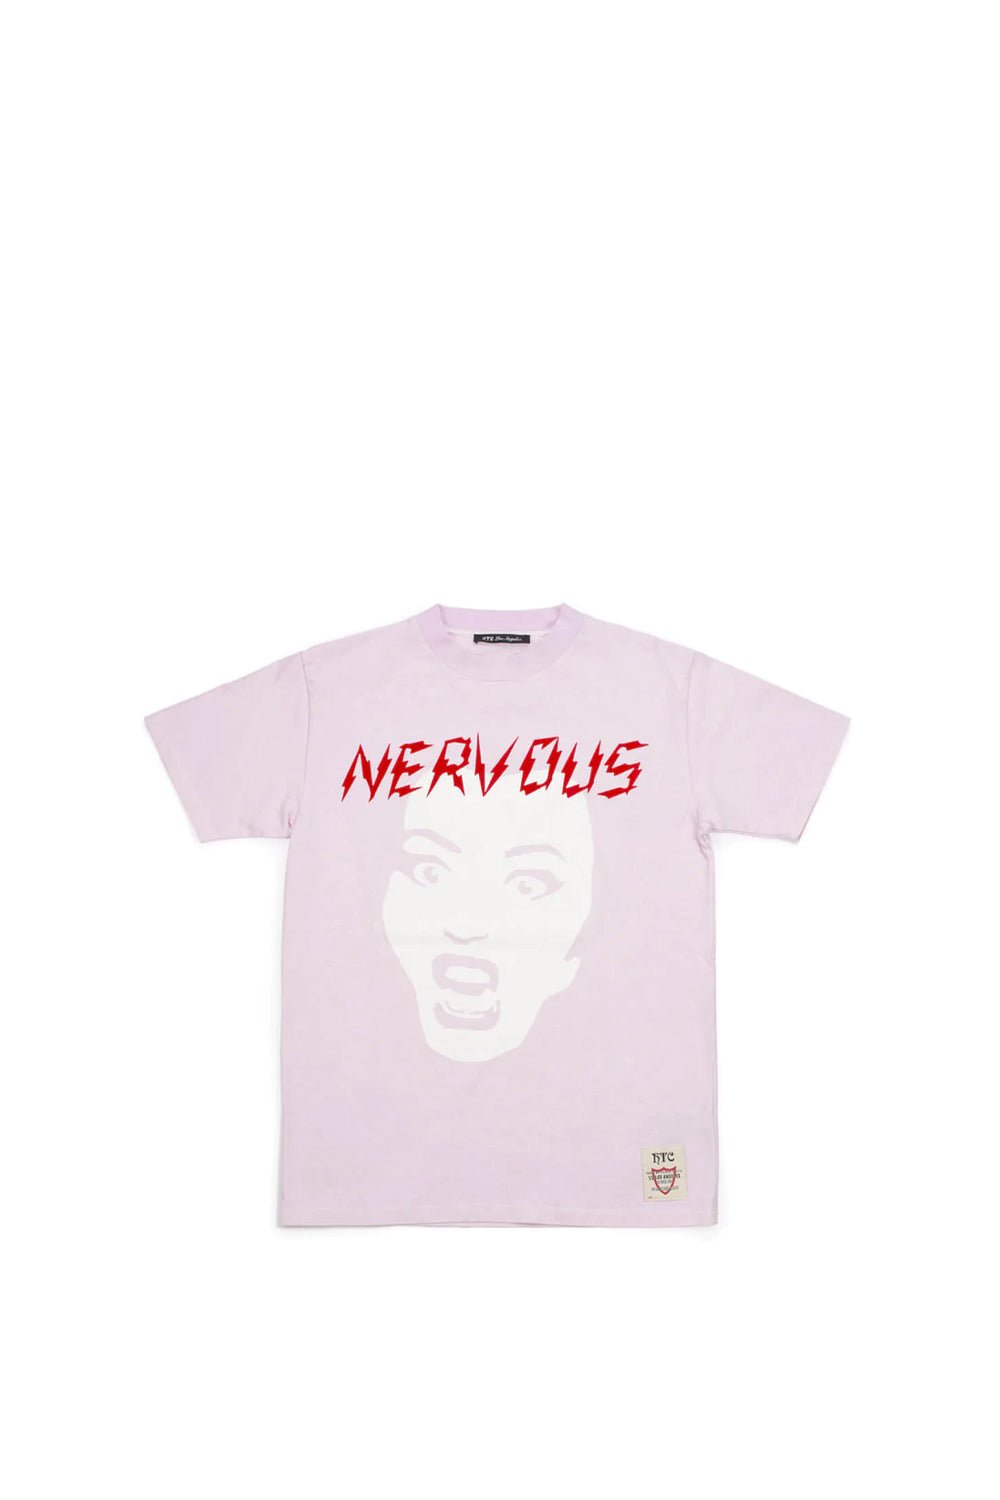 NERVOUS WOMAN T-SHIRT Pink t-shirt with front 'Nervous' print. HTC Los Angeles print on the back. 100% cotton. Made in Italy. HTC LOS ANGELES